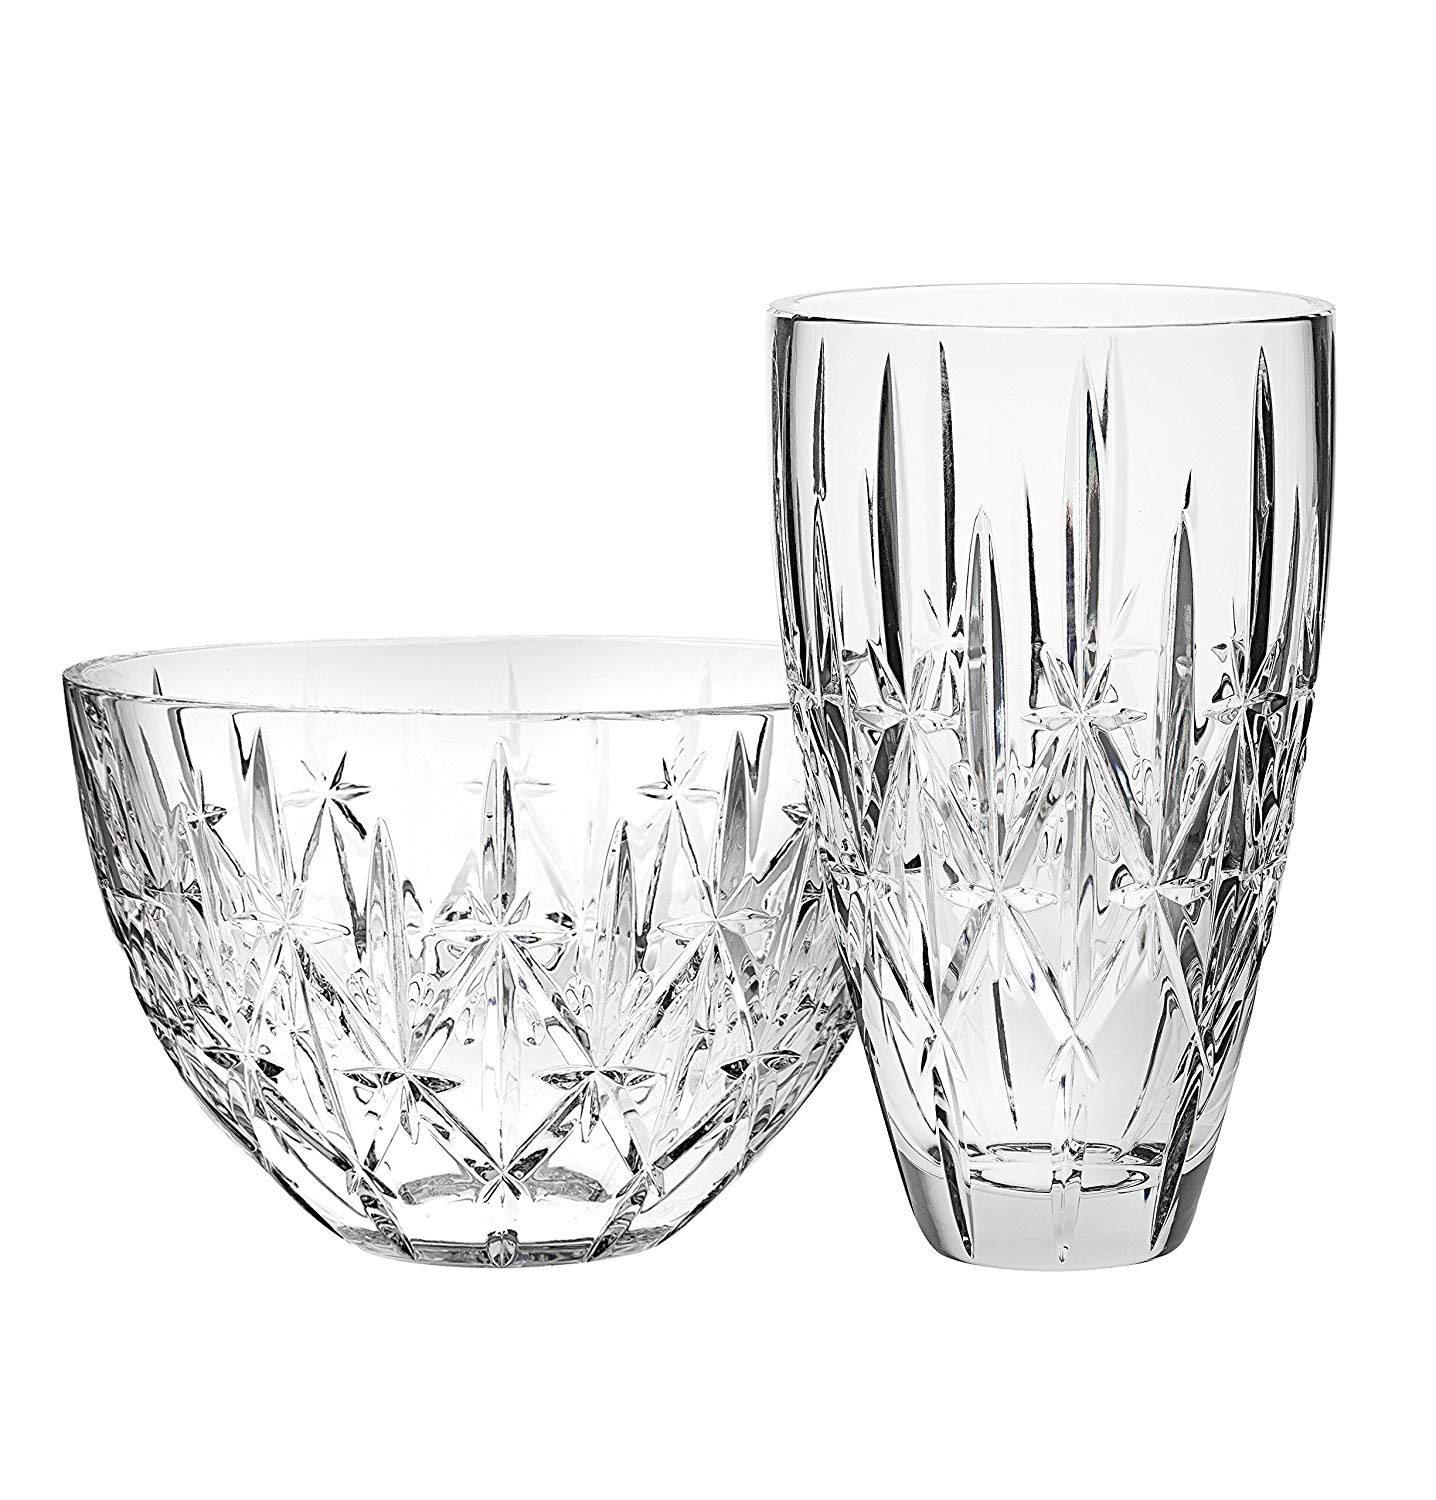 11 Lovable Marquis by Waterford Sheridan Flared 11 Crystal Vase 2024 free download marquis by waterford sheridan flared 11 crystal vase of amazon com marquis by waterford sparkle bowl 9 home kitchen for 91ze4xzhccl sl1500